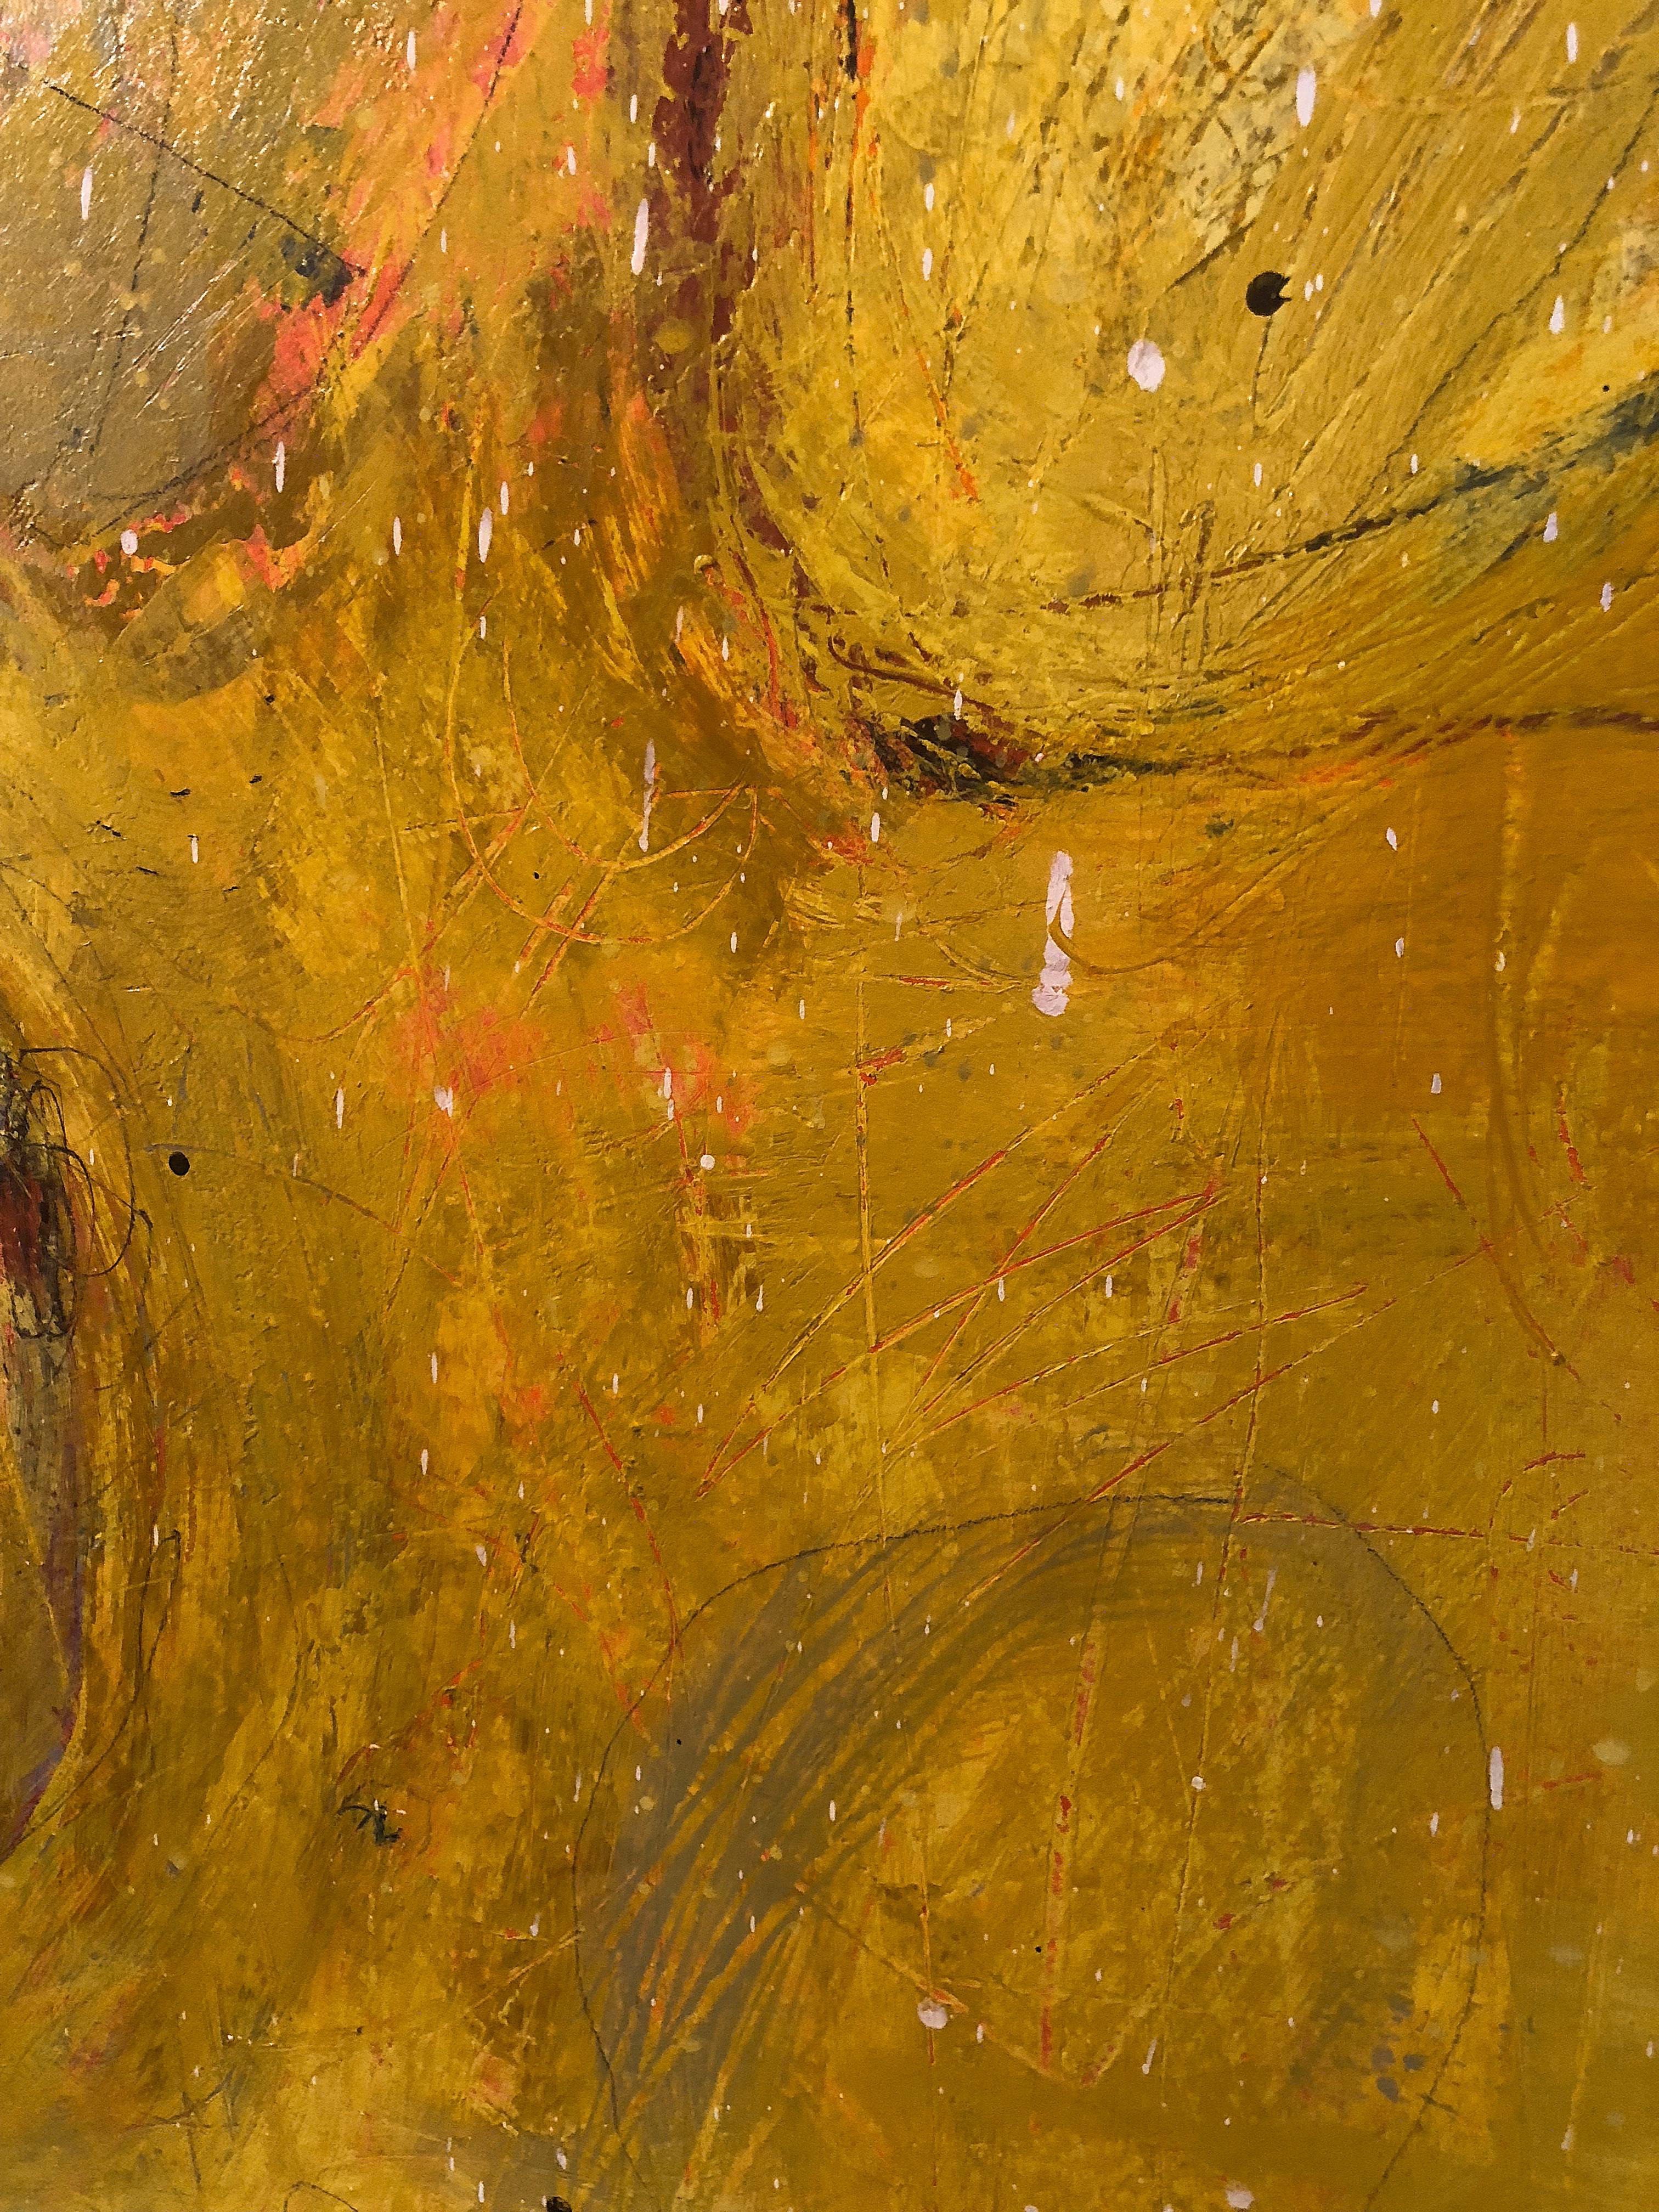 Rendezvous/Without My Reason - Original mixed media on canvas - 60 x 60 in. - Yellow Abstract Painting by Kevin Tolman